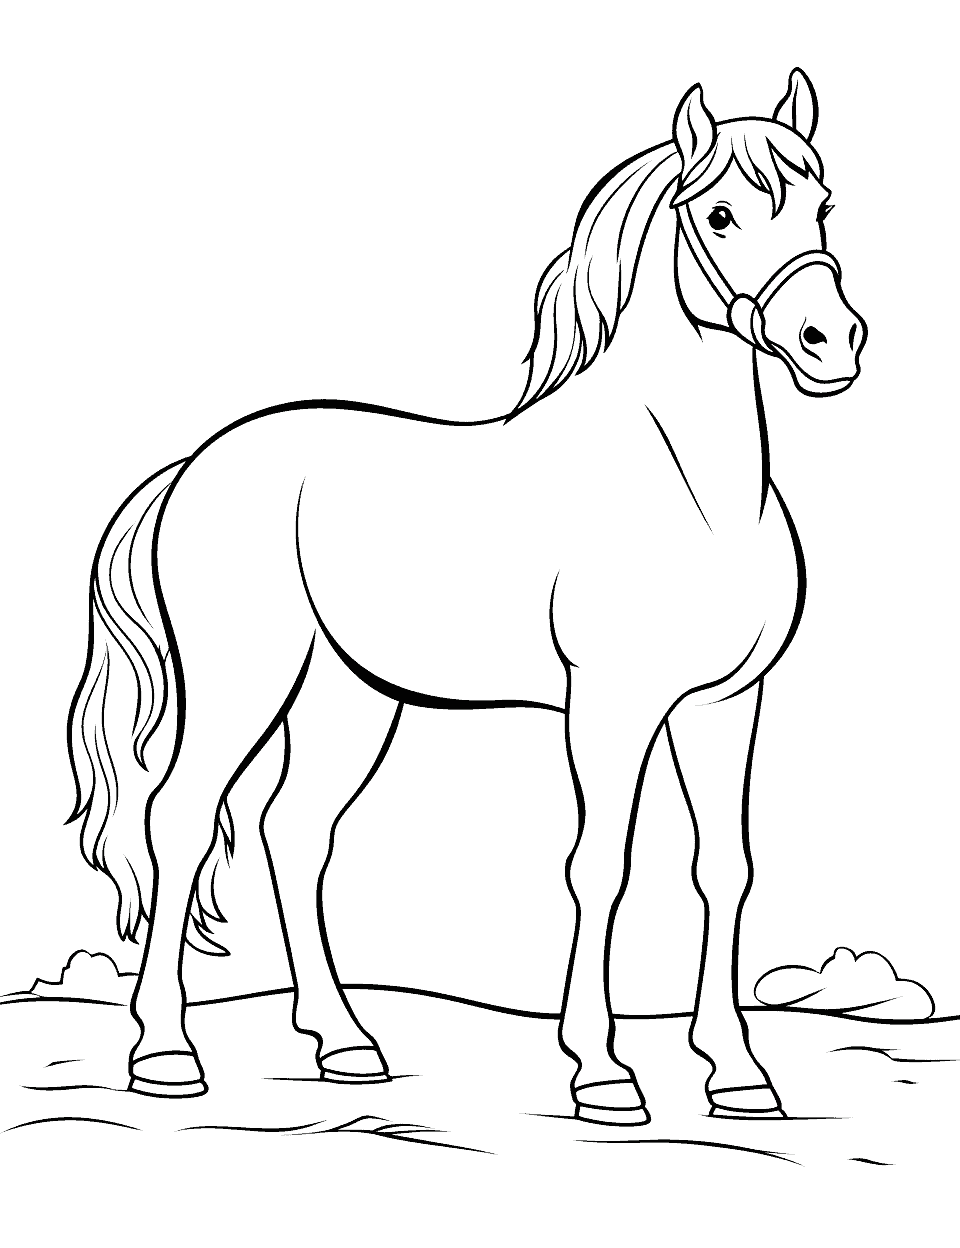 Horse Drawing Outline Coloring Page - A simple horse drawing outline, perfect for beginner artists.